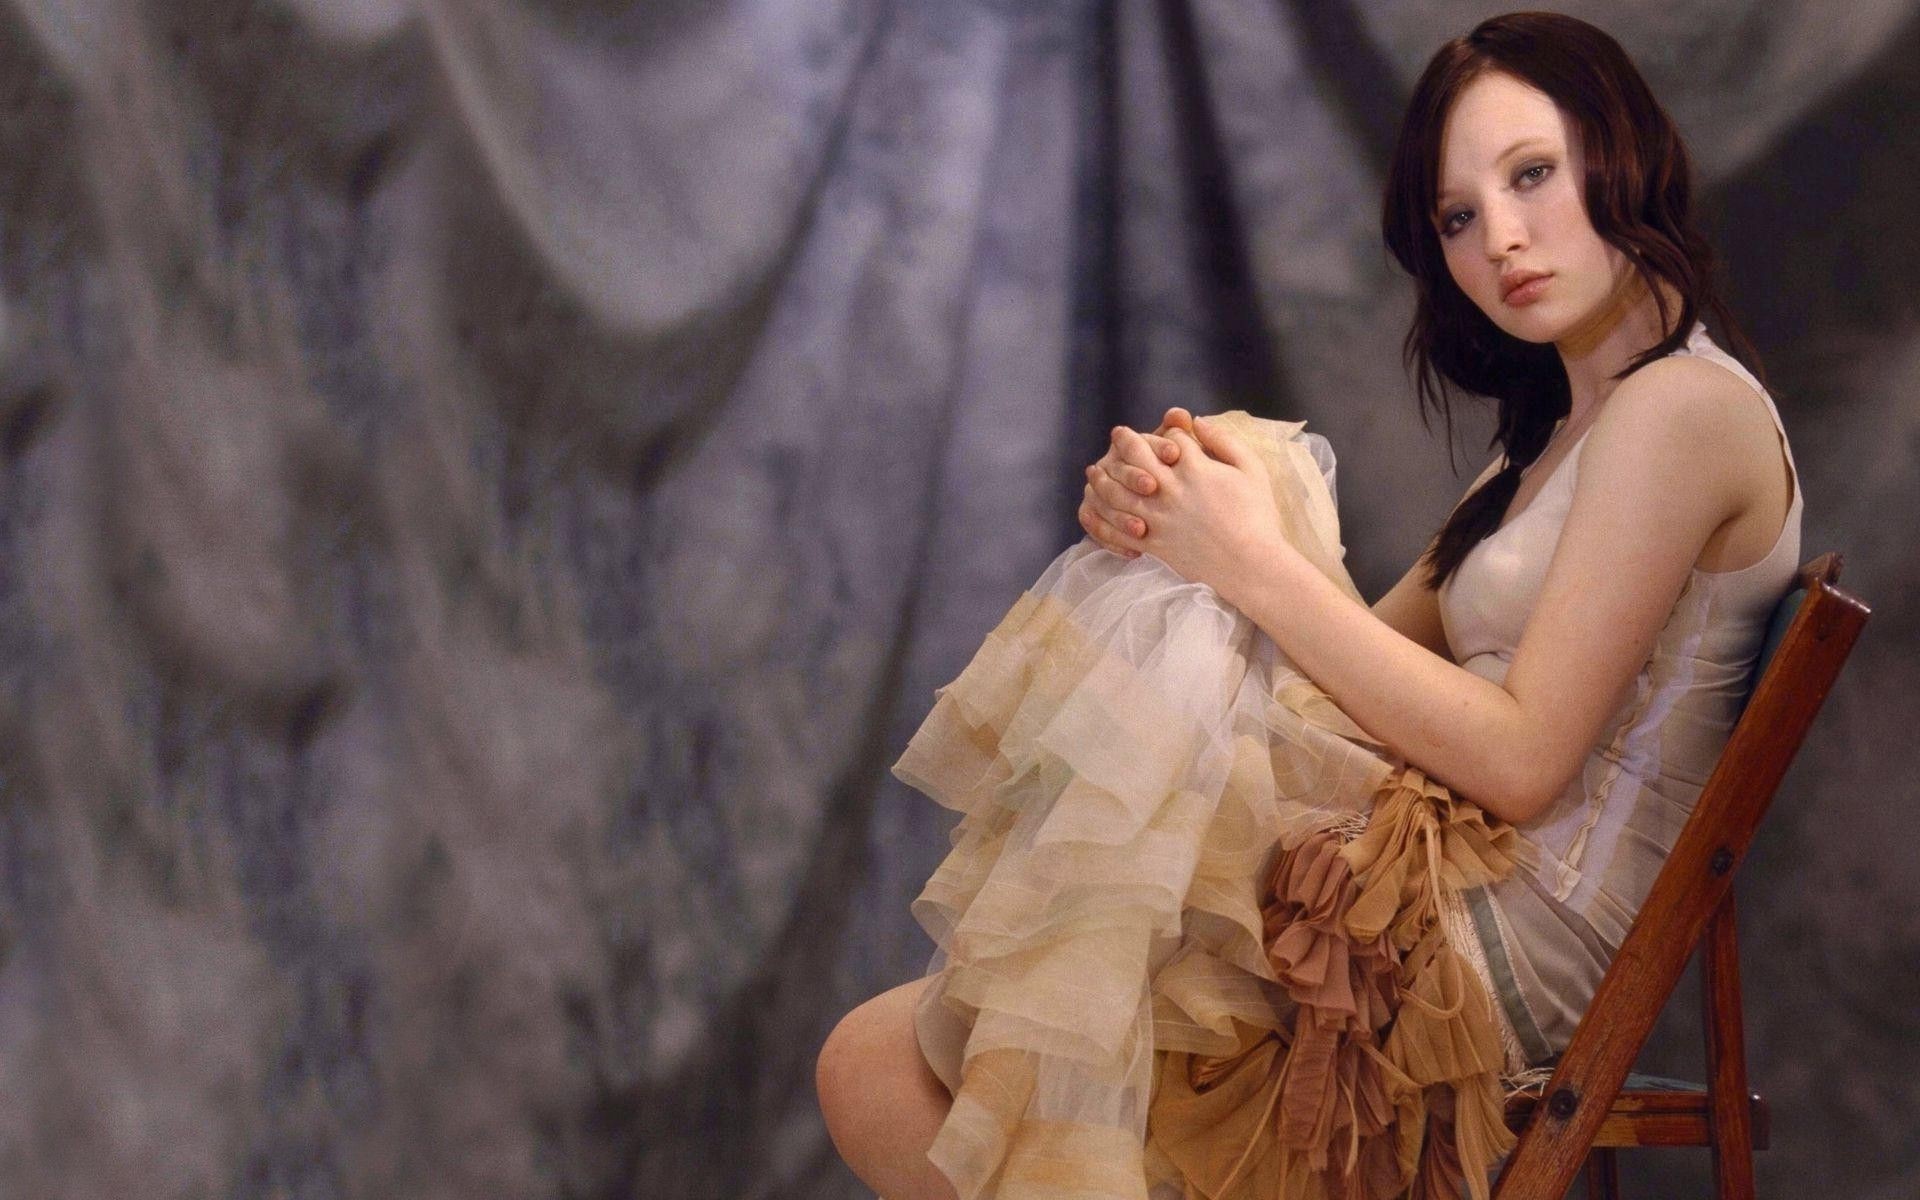 Emily Browning wallpapers, HD background images, Wallpapercat collection, Stunning visuals, 1920x1200 HD Desktop